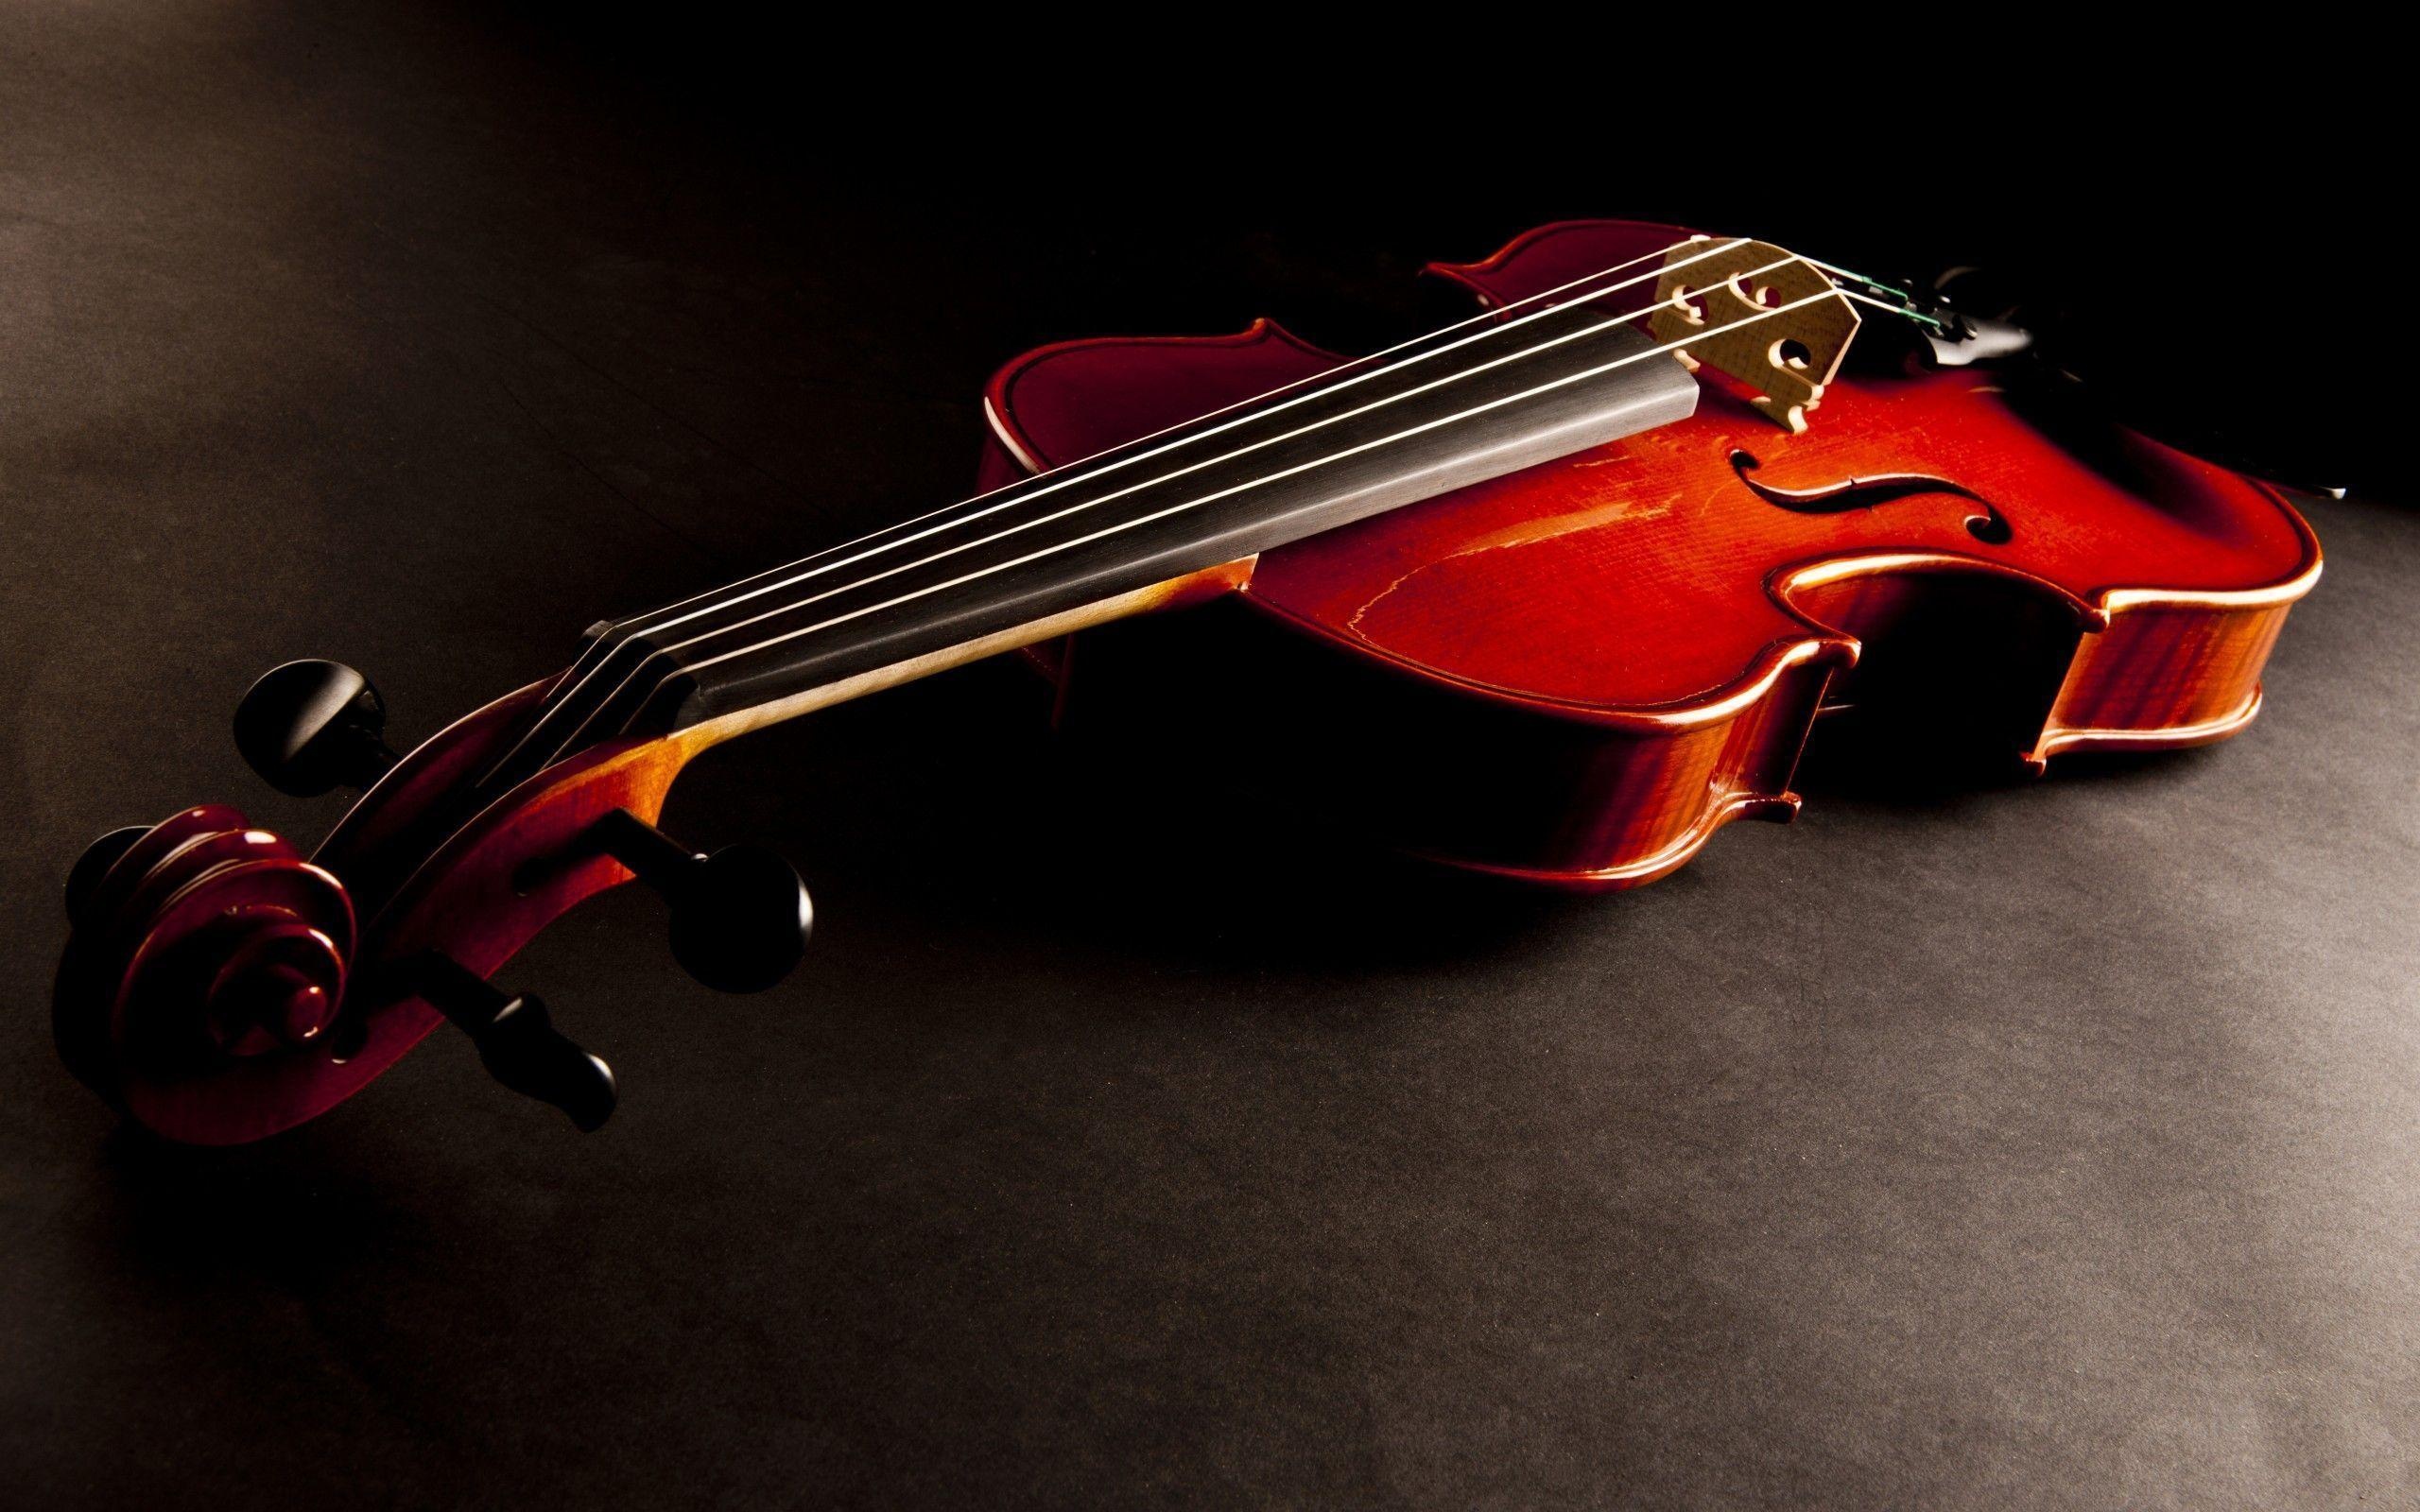 Viola: German Physicist And Musician Ernst Chladni, Also Labeled As "The Father Of Acoustics". 2560x1600 HD Wallpaper.